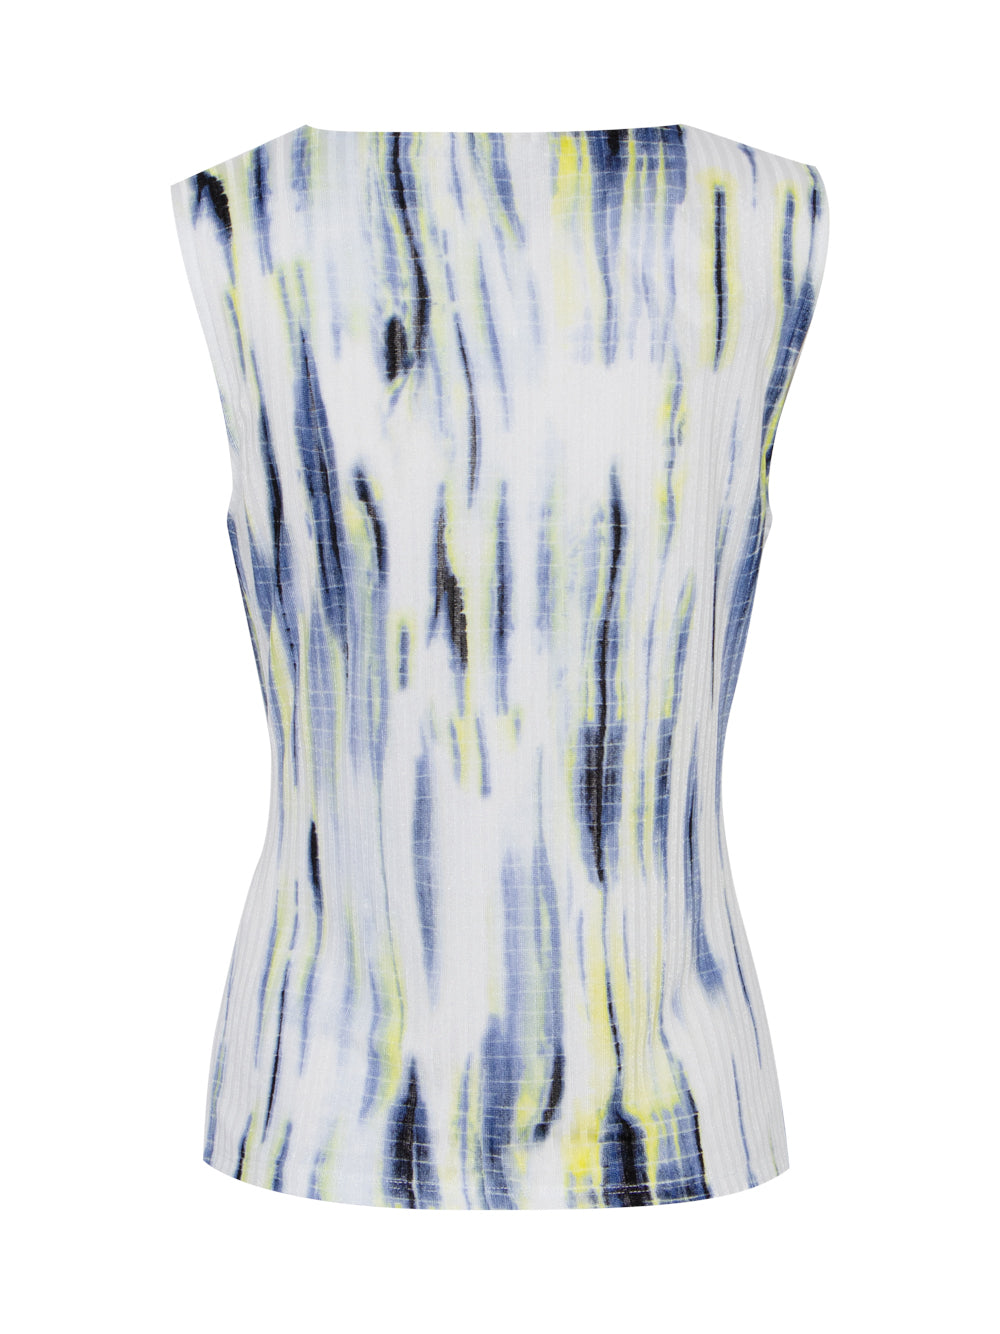 Sleeveless Print Hacci Front Wrap Top (White/Inky/Blue/Multi)